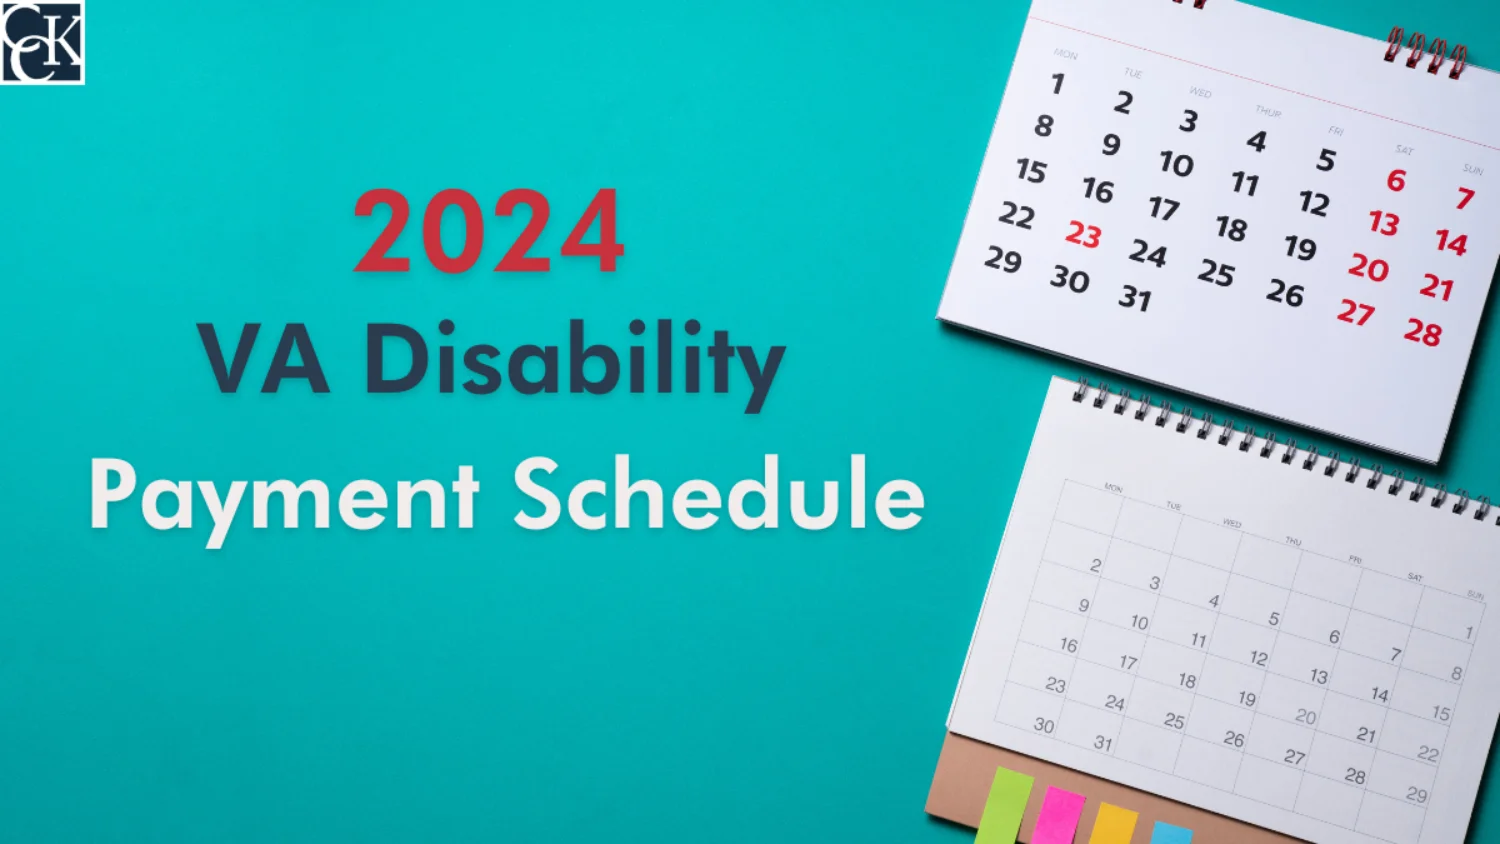 Va Disability Payment Schedule For 2024 Debbie Kendra